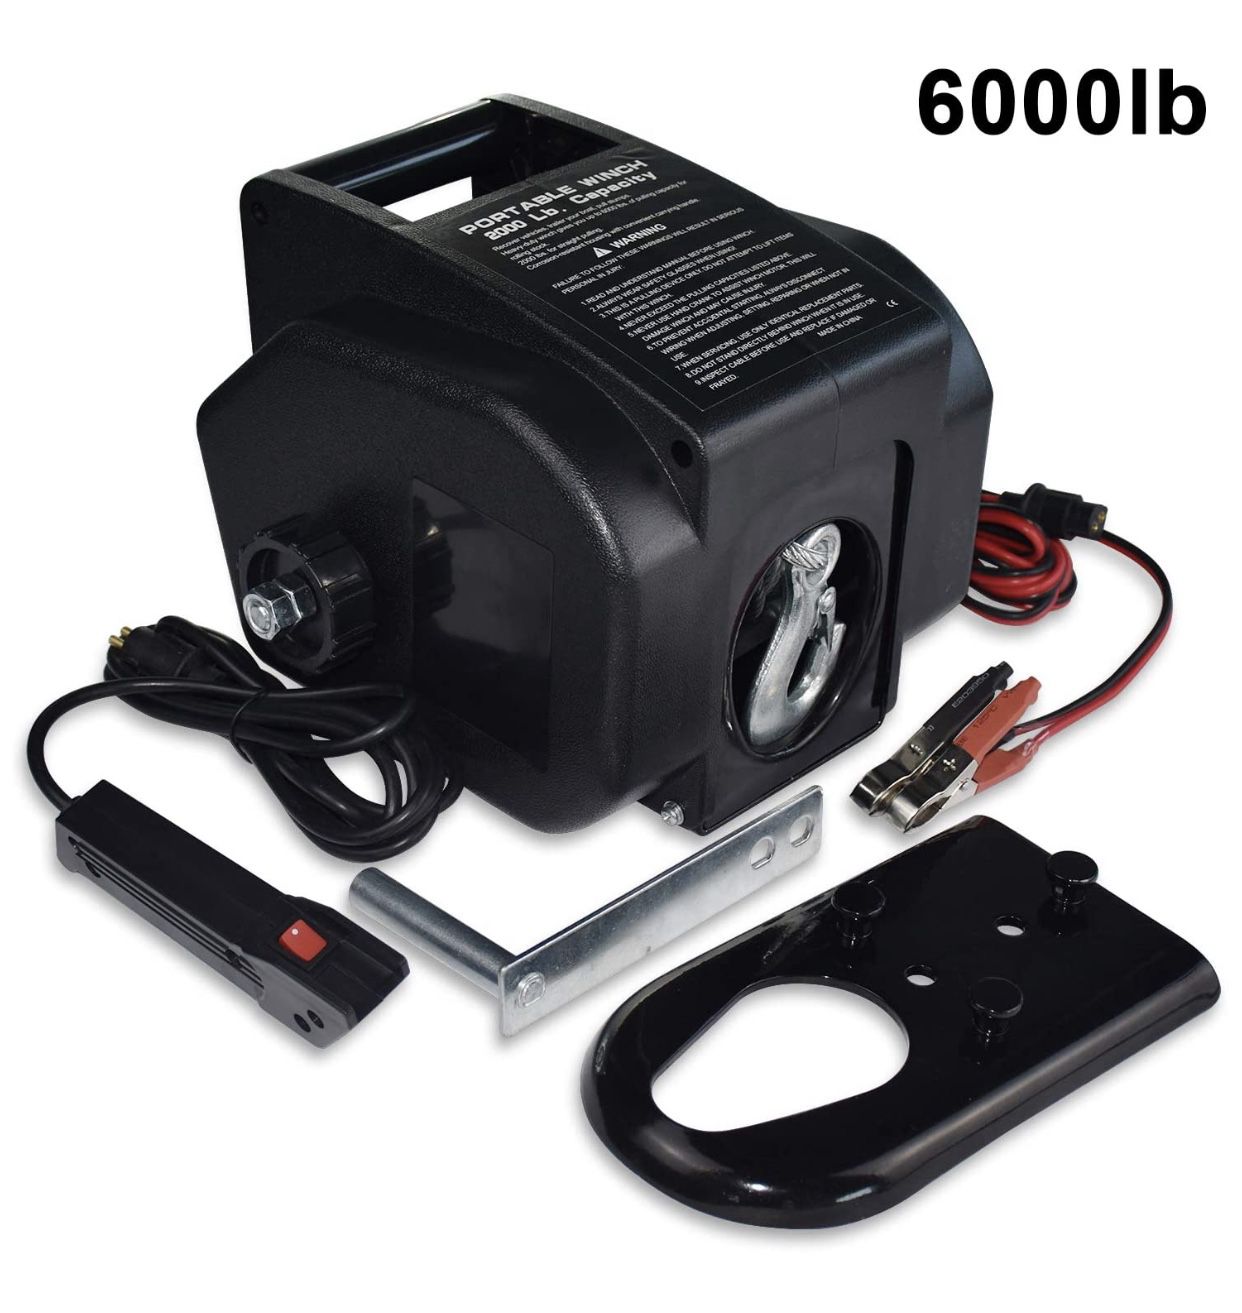 Brand New Trailer Winch,Reversible Electric Winch, for Boats up to 6000 lbs 12V DC,Power-in, Power-Out, and Freewheel Operations, with Corded Remote